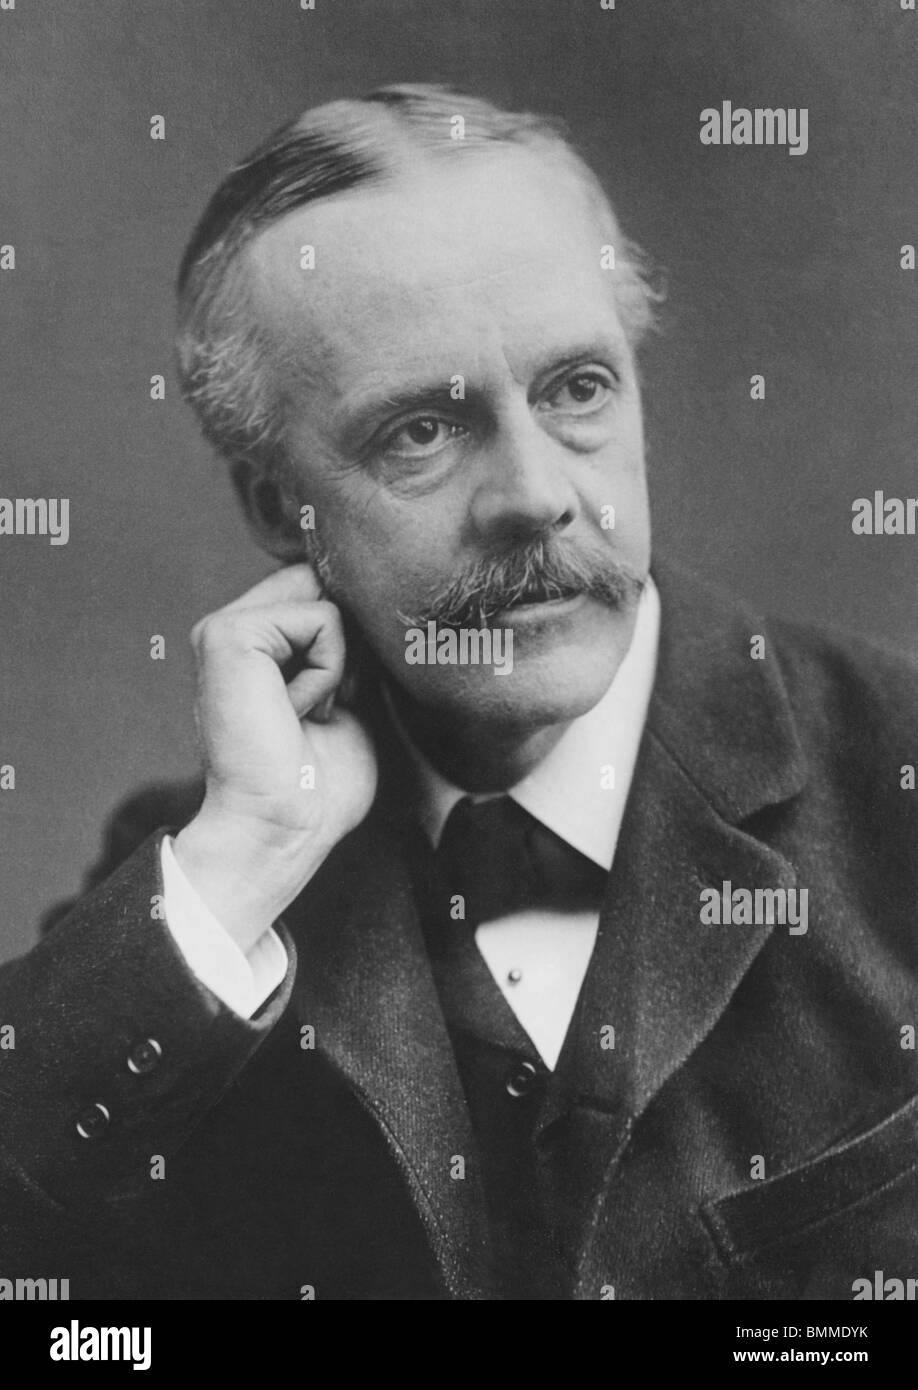 Undated portrait photo of Arthur James Balfour (1848 - 1930) - Conservative statesman and UK Prime Minister from 1902 to 1905. Stock Photo